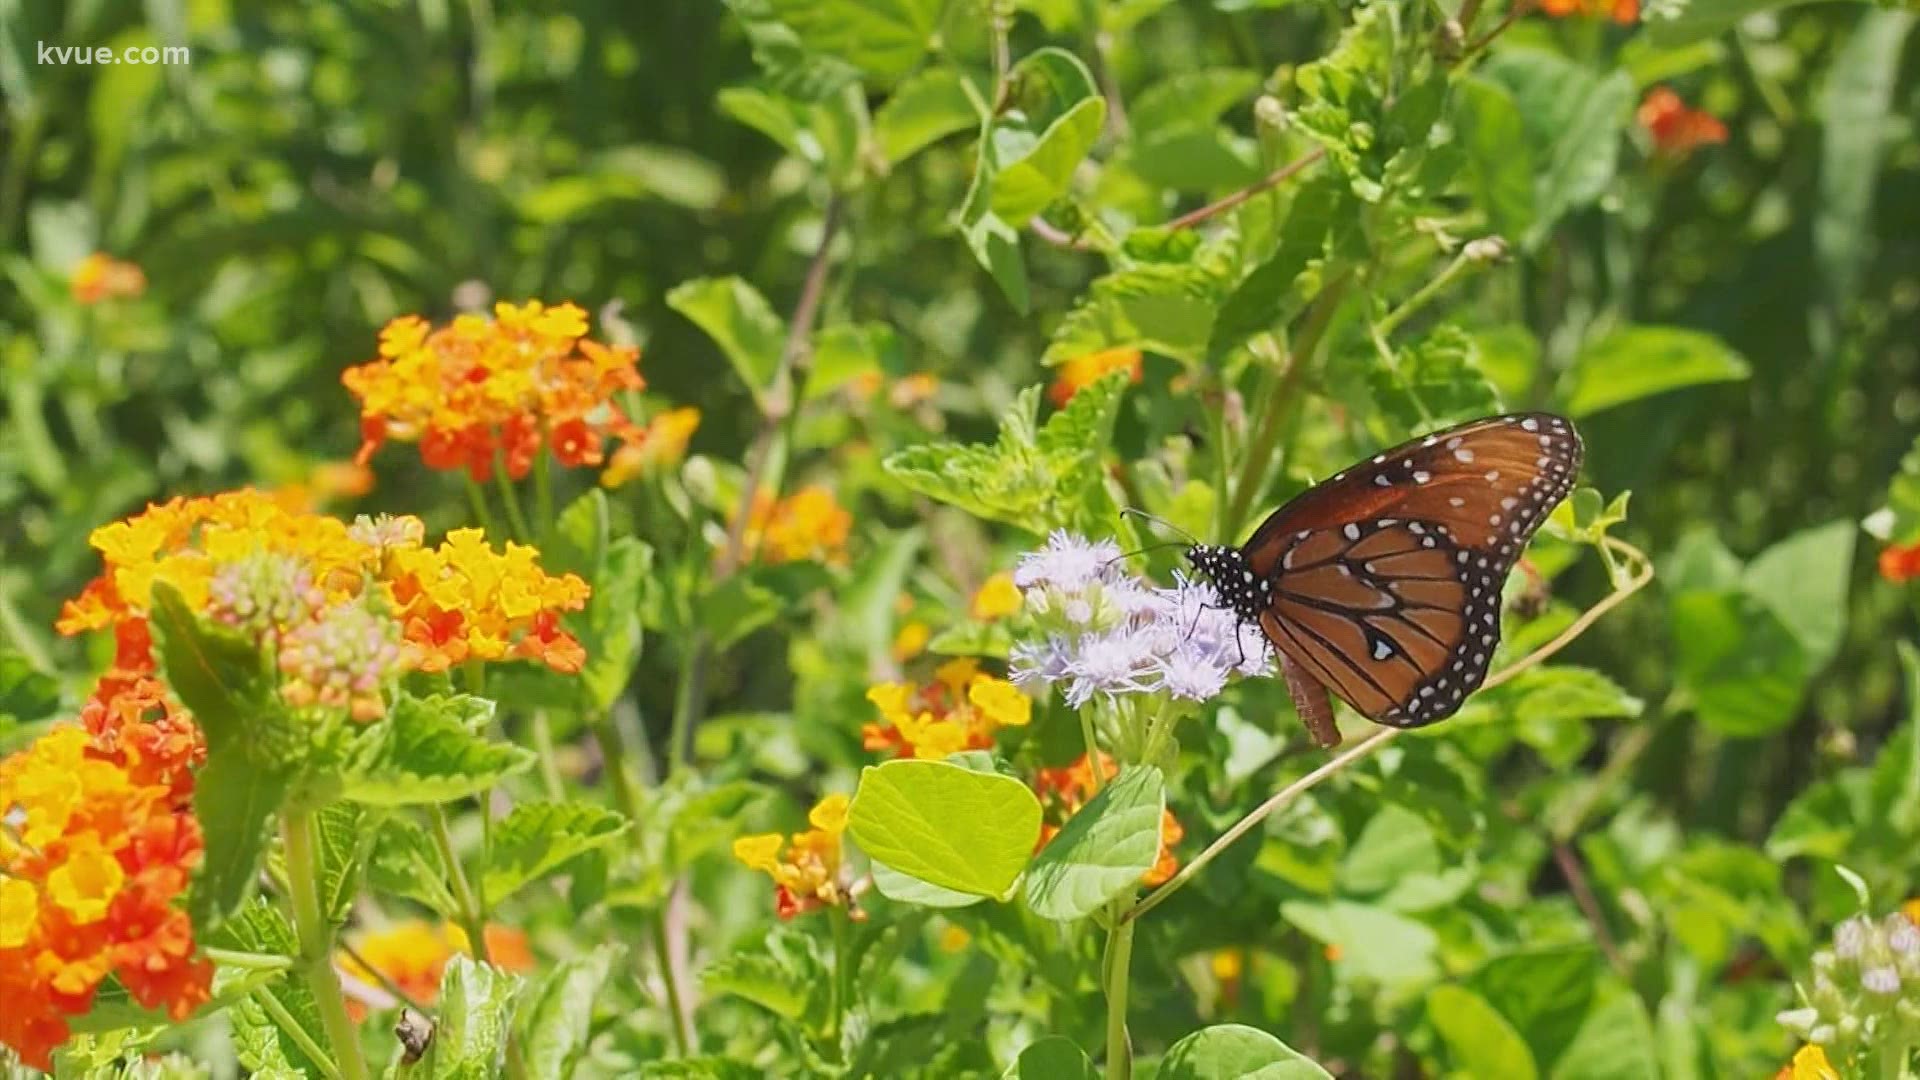 The snout nose butterflies have been spotted fluttering all over Central Texas during their migrating season. They look a bit like monarchs.